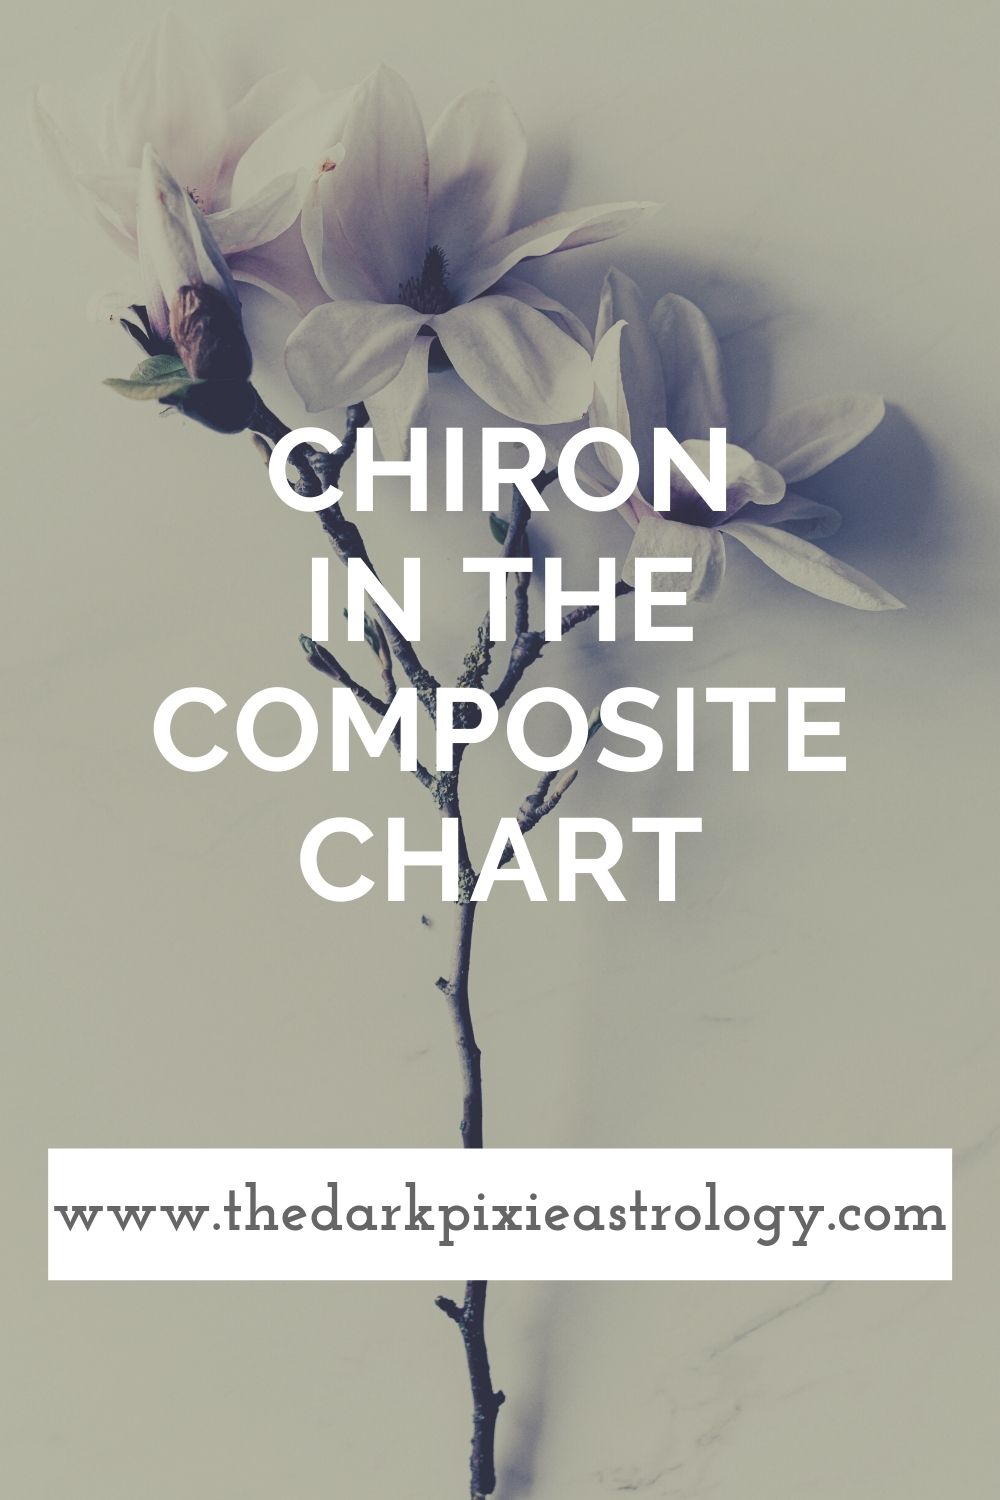 Chiron in the Composite Chart - The Dark Pixie Astrology